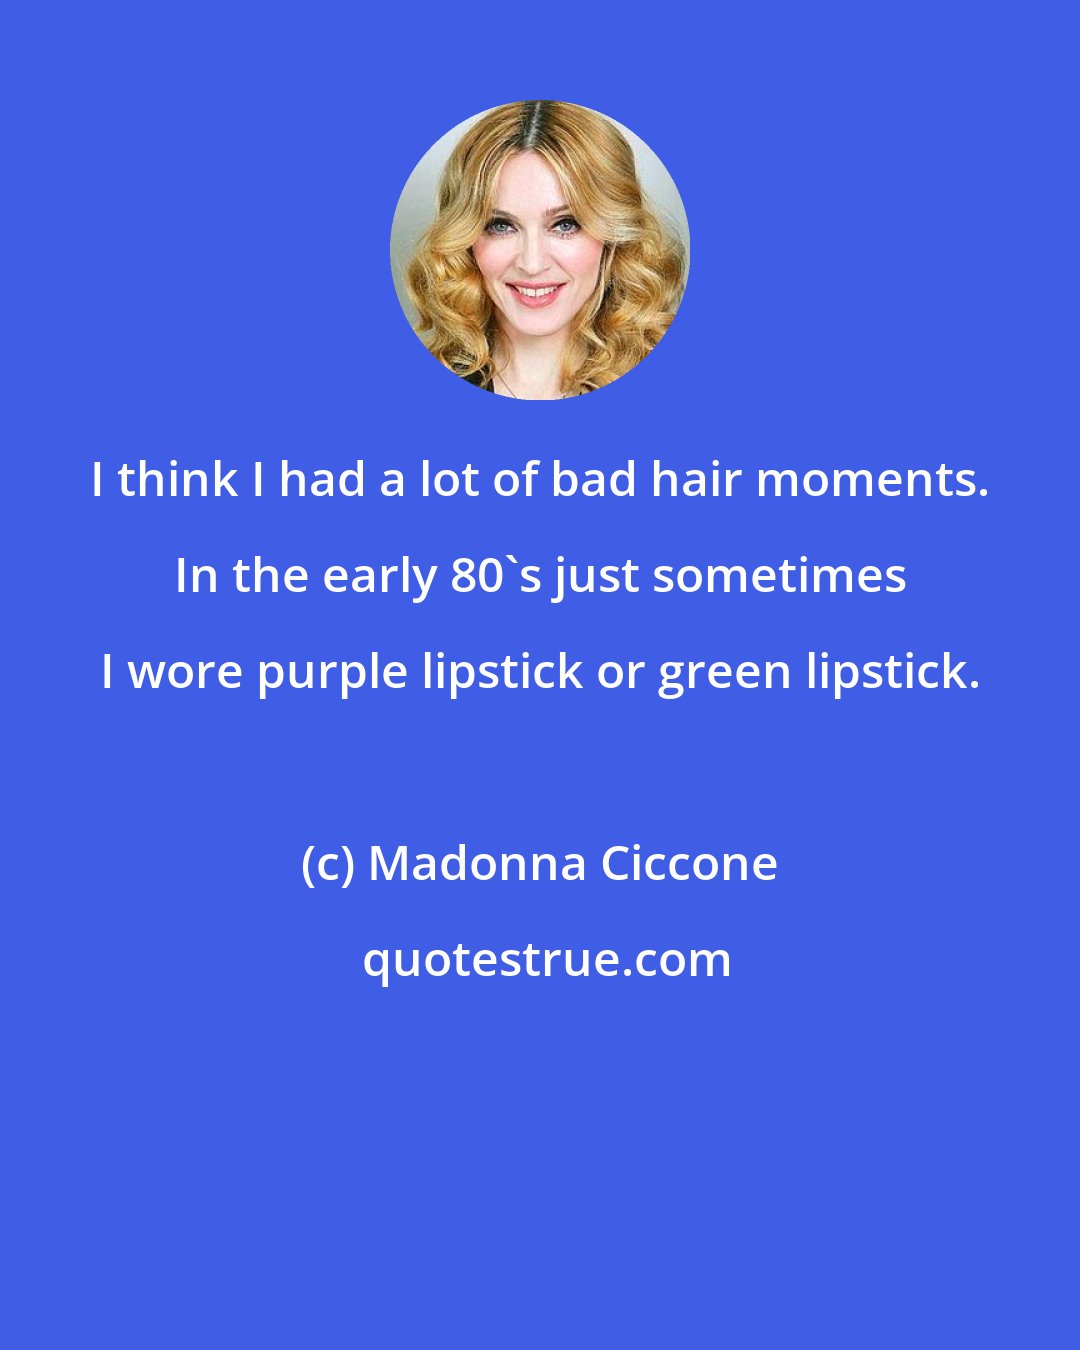 Madonna Ciccone: I think I had a lot of bad hair moments. In the early 80's just sometimes I wore purple lipstick or green lipstick.